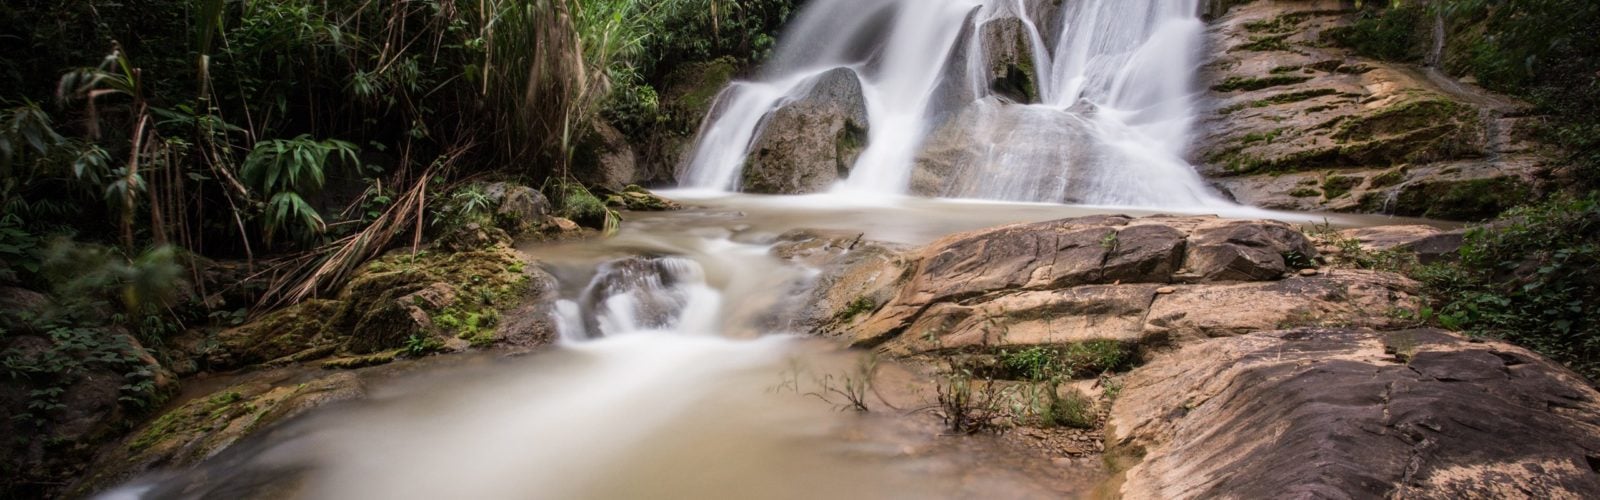 Waterfall in the Oudomxay province of Laos